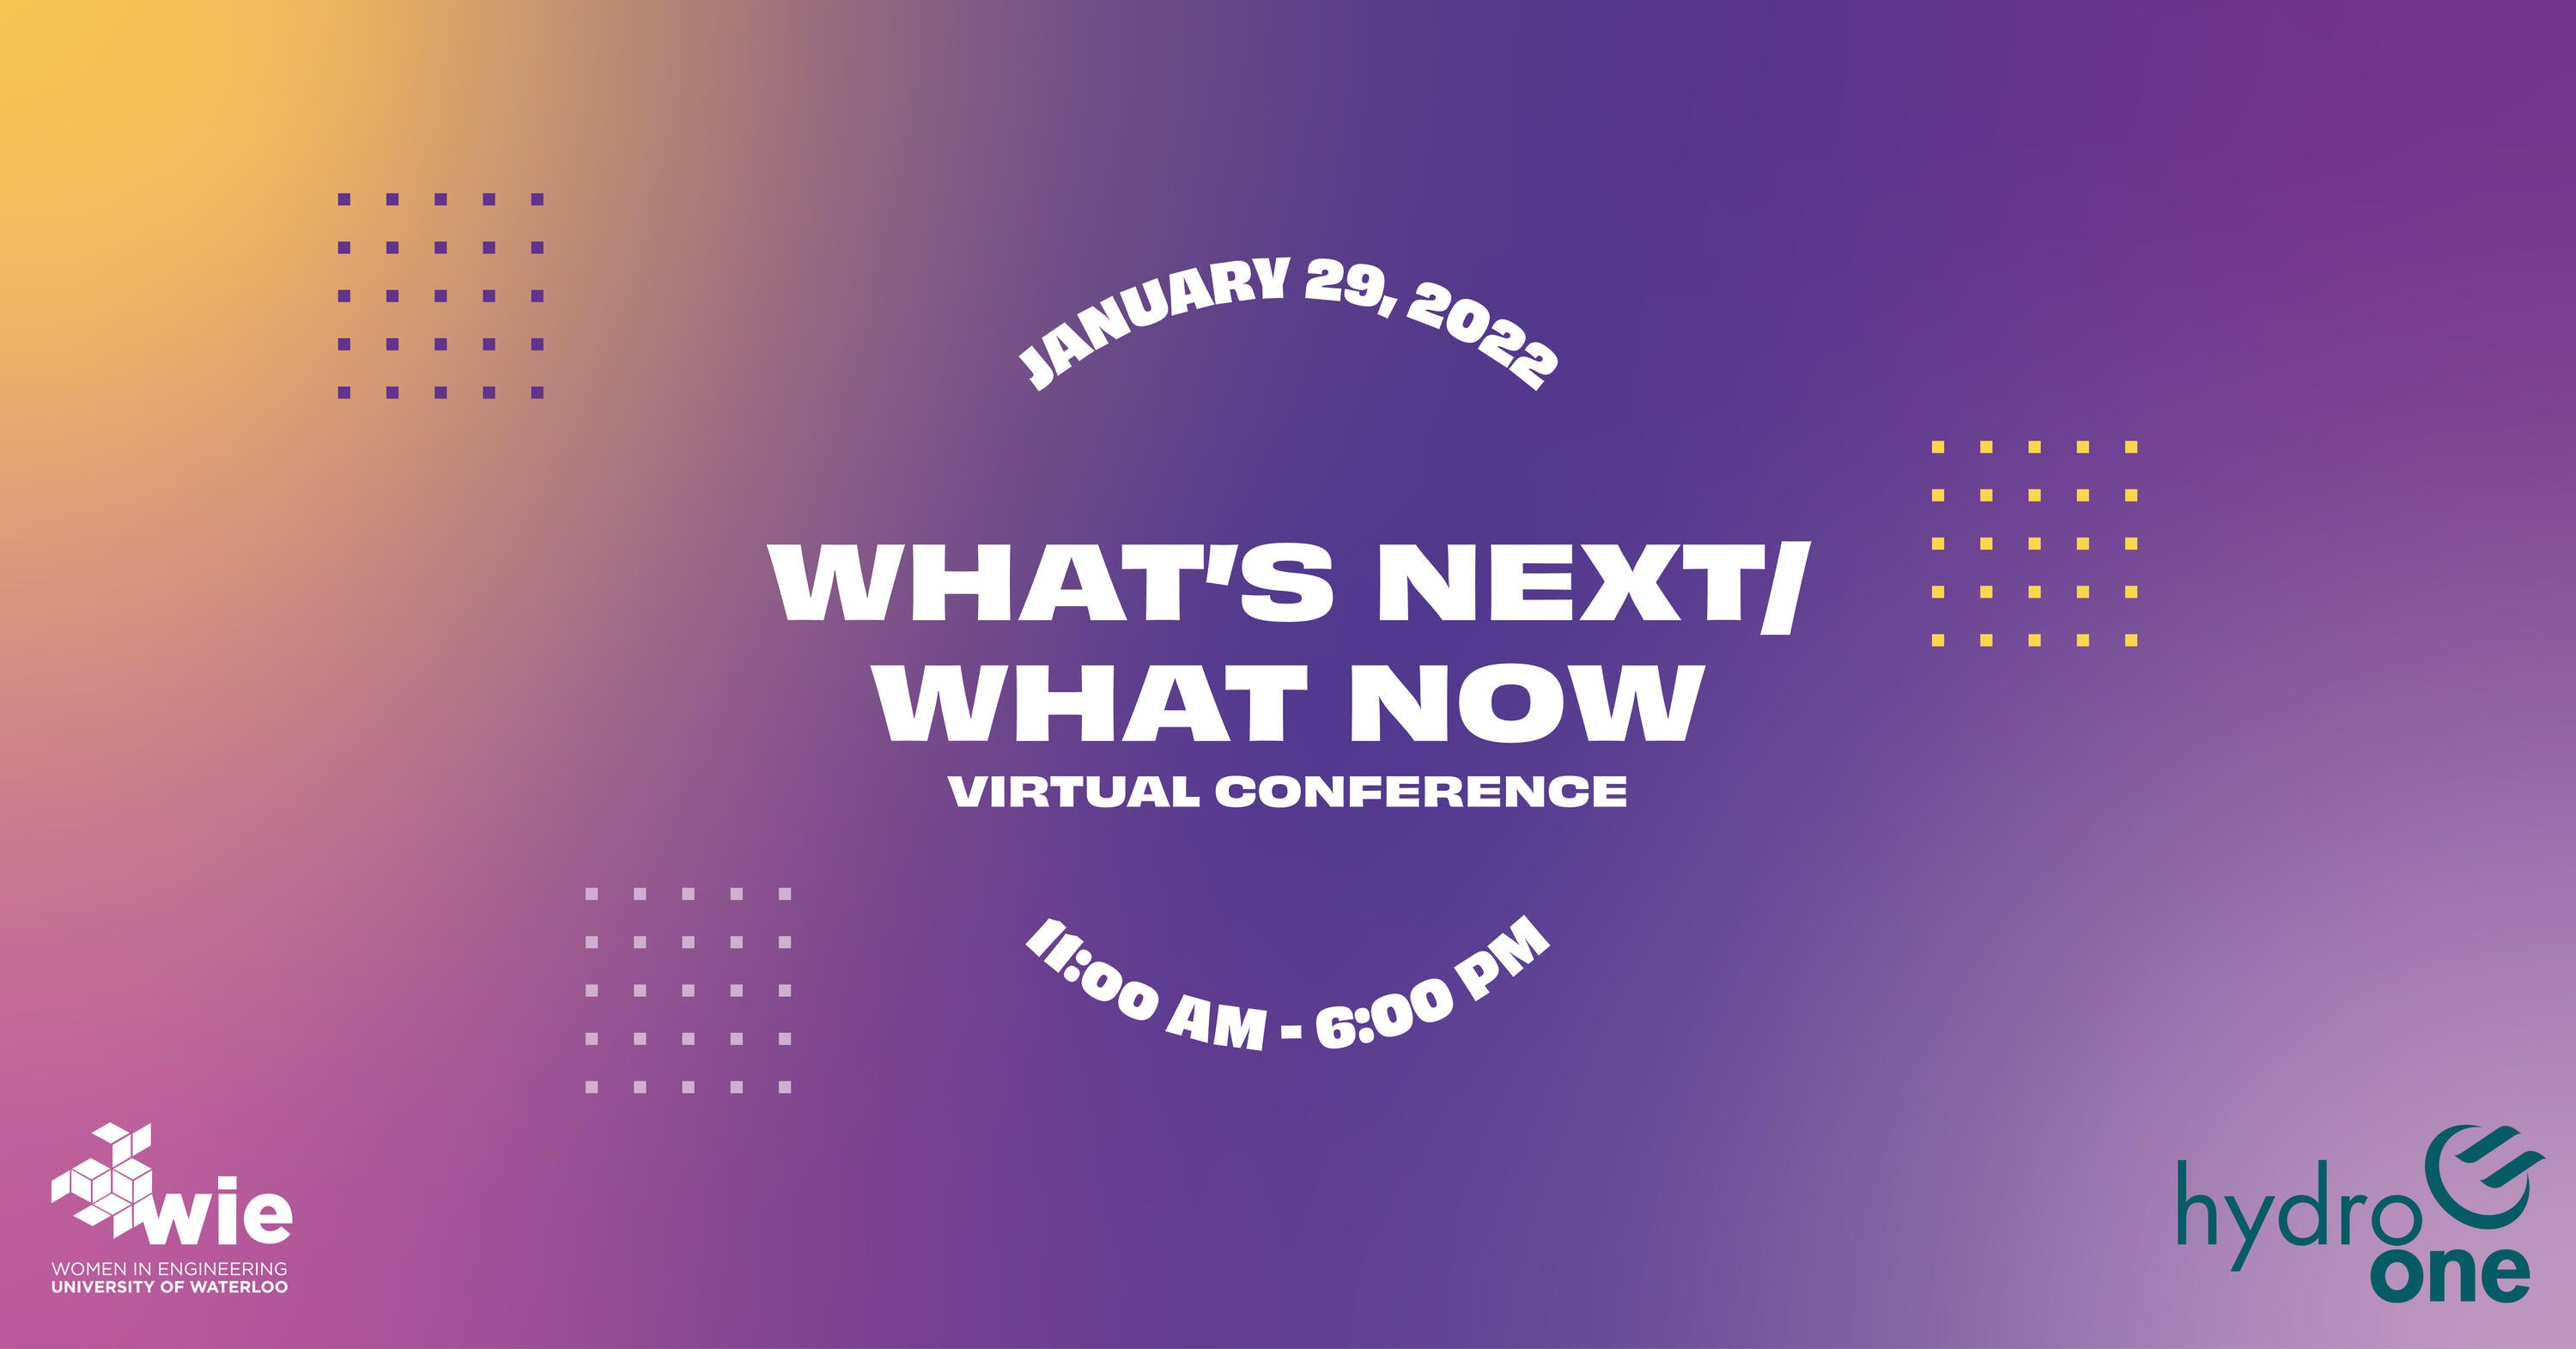 Post mentioning the What's Next What Now conference date, time, location, registrations open and HydroOne Logo